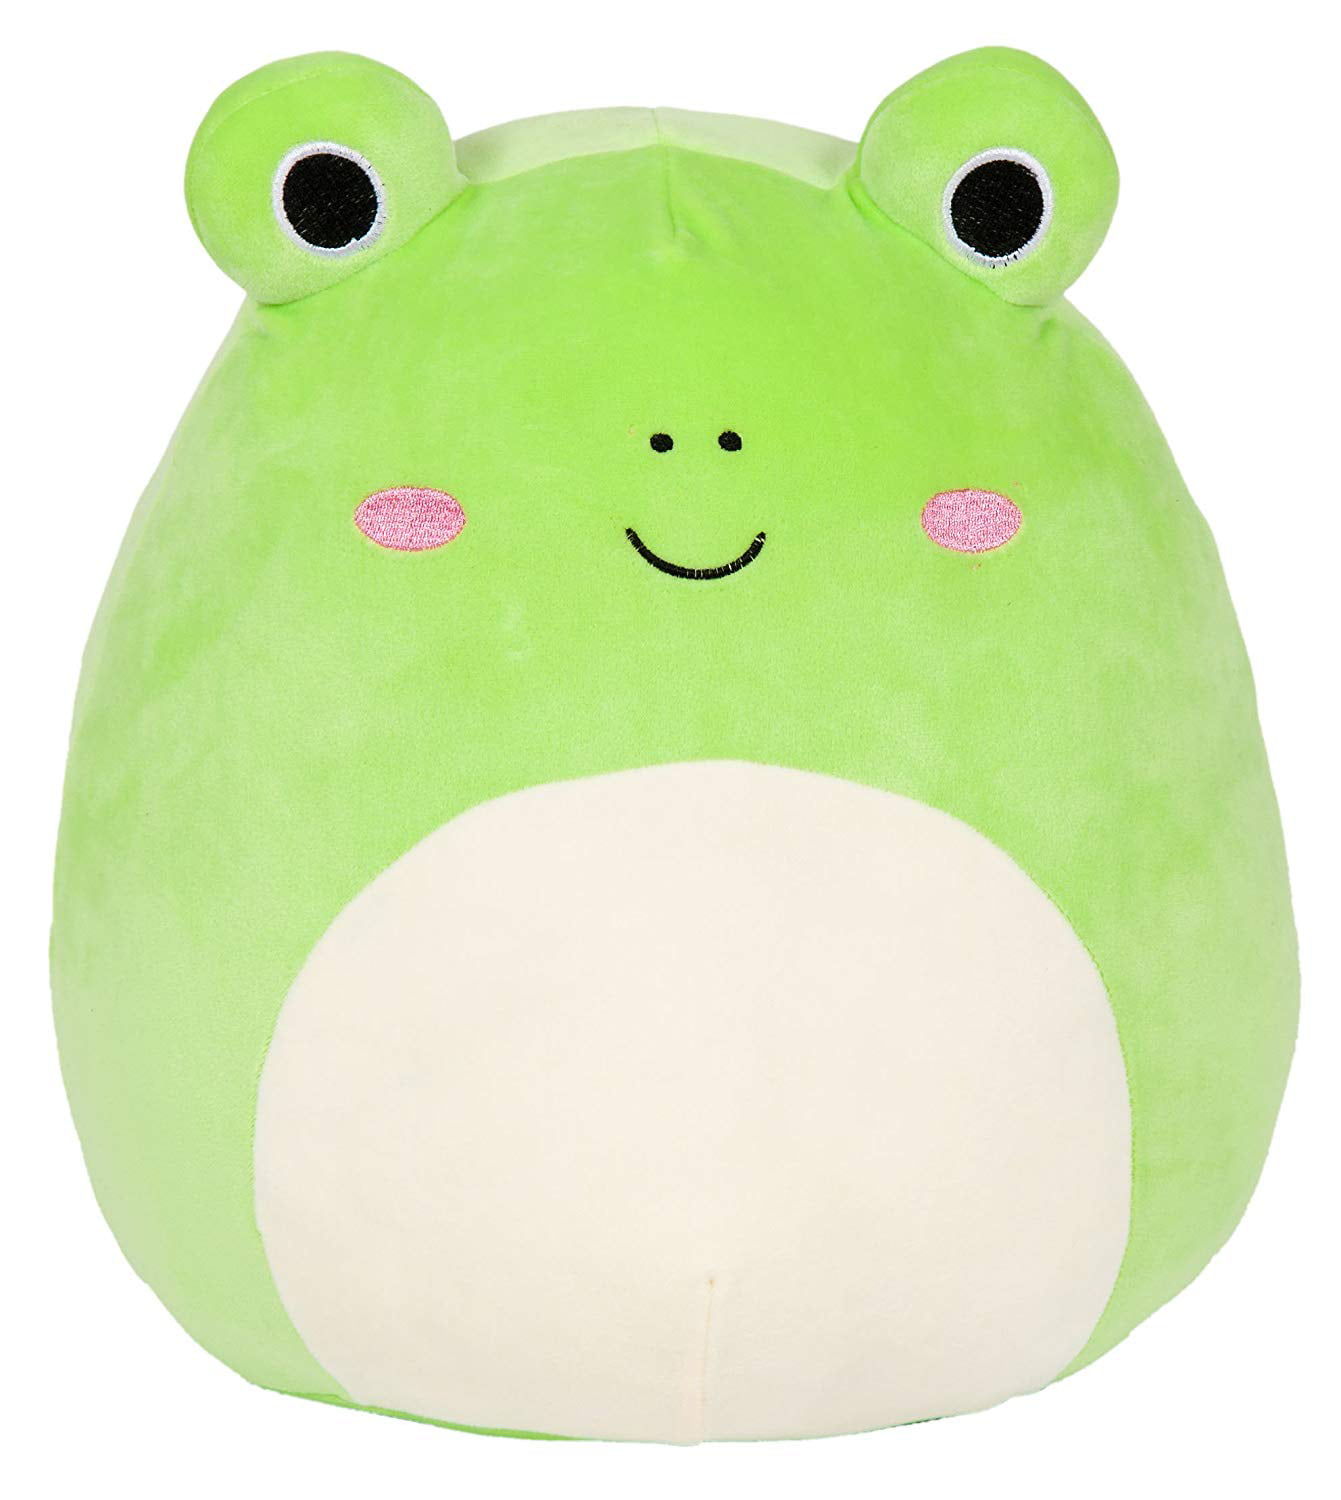 Squishmallows Wendy the Frog 16 inch Plush Toy for sale online 